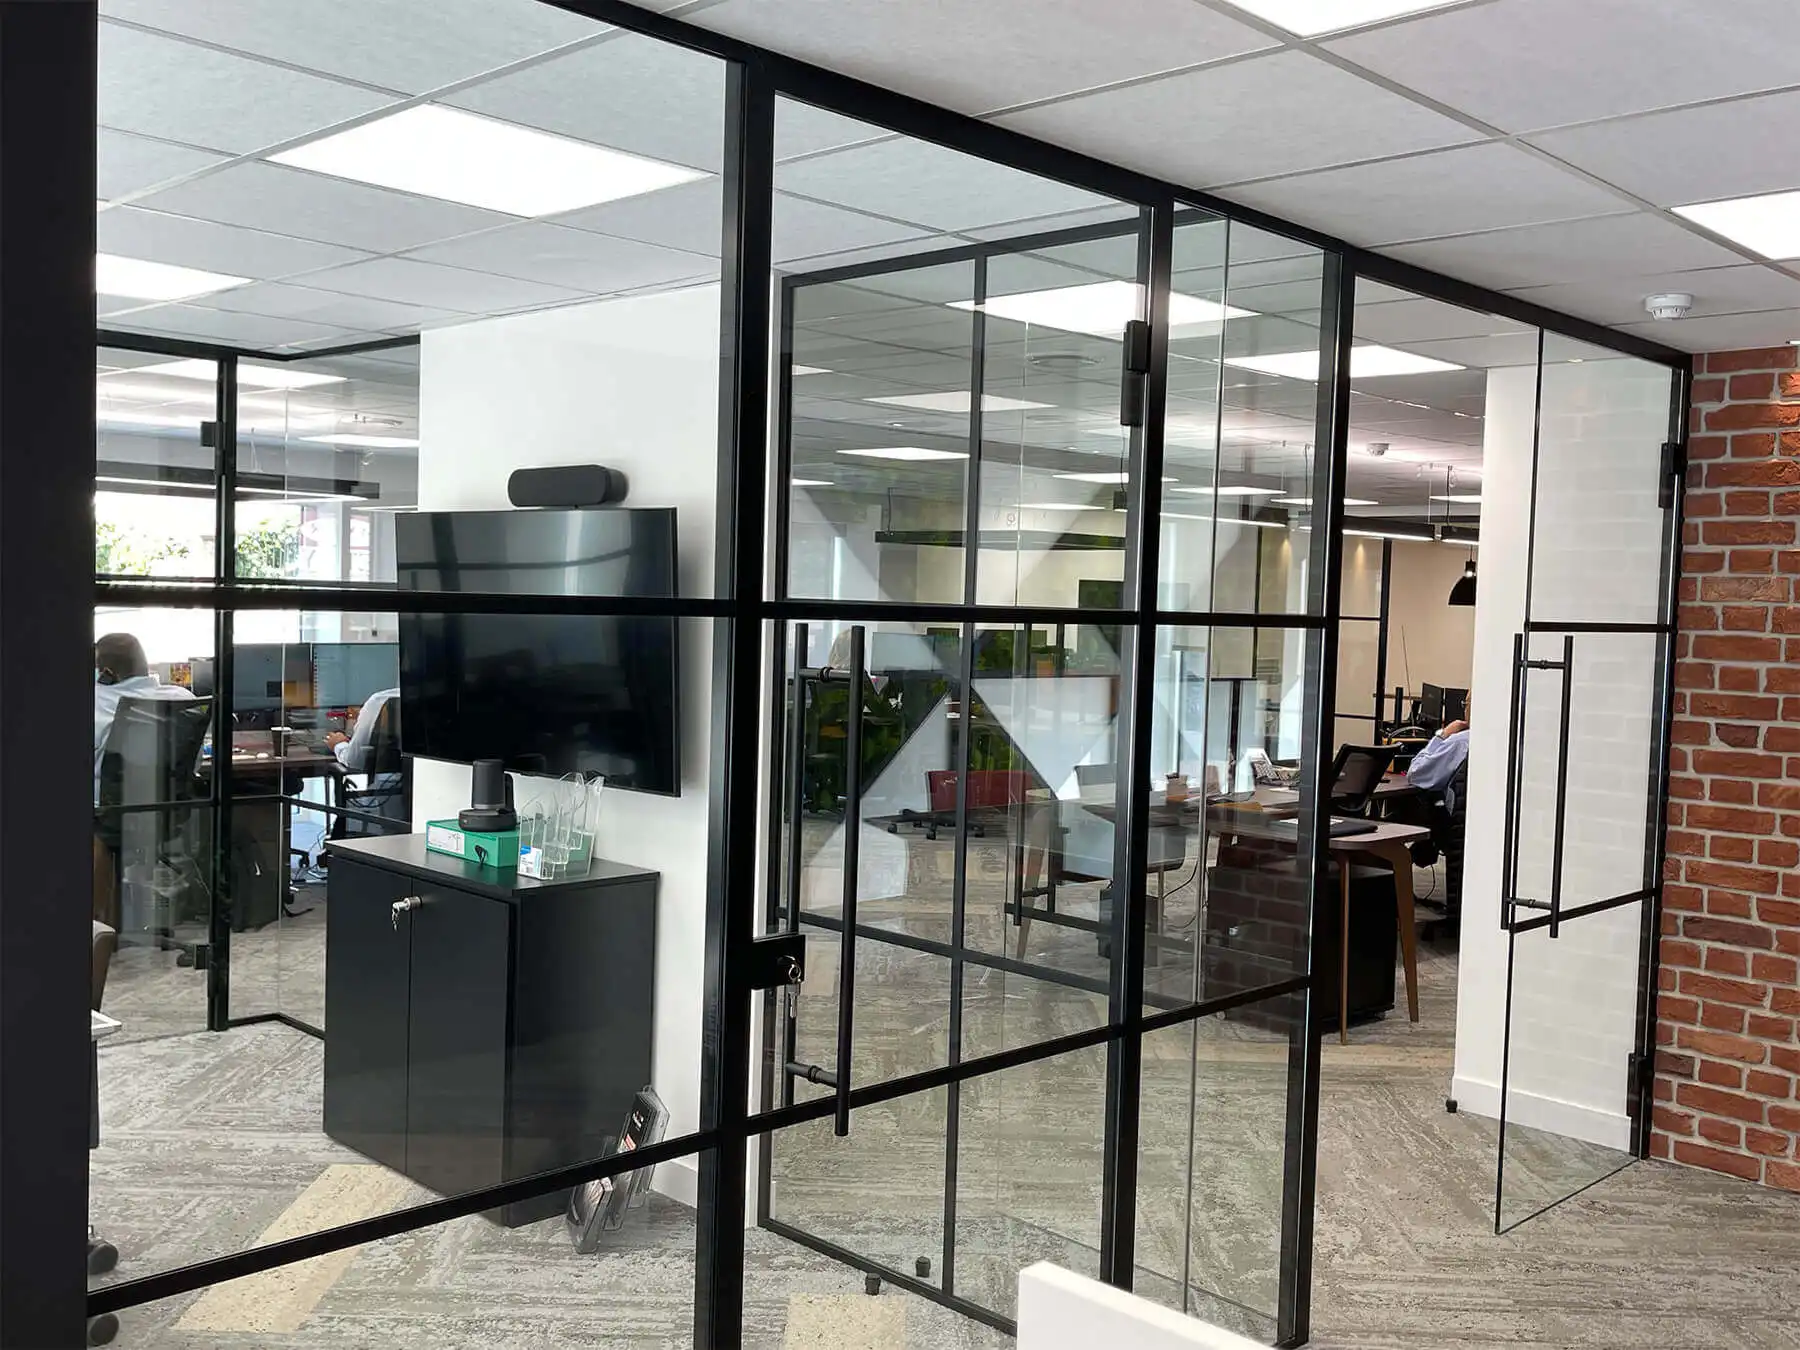 Office spaces separated with black framed dividers